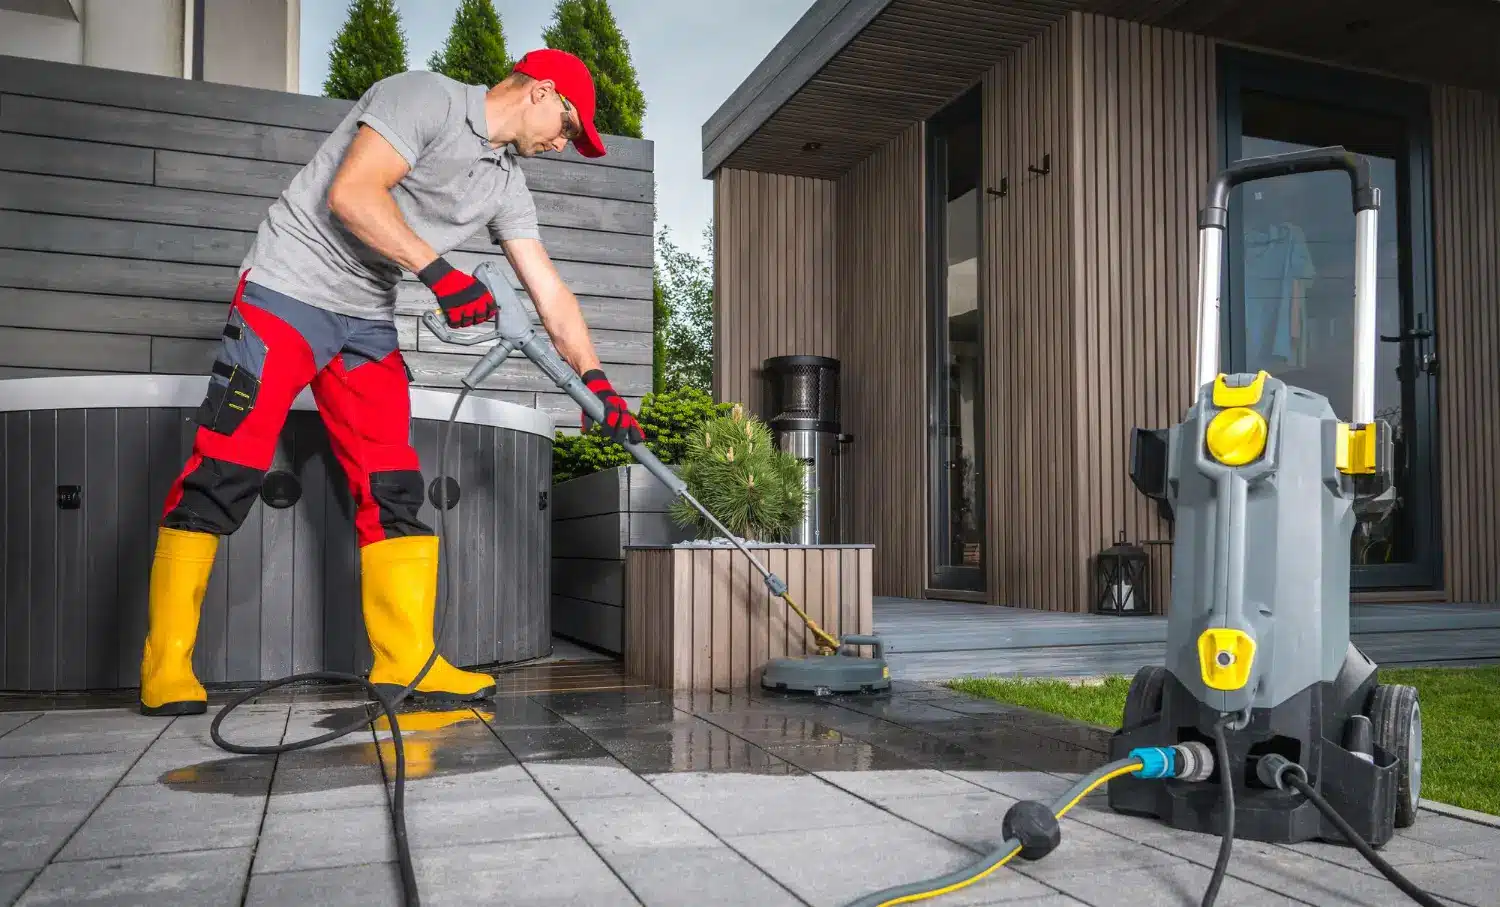 Clean Your Home Effectively With Kärcher’s High-Pressure Cleaners